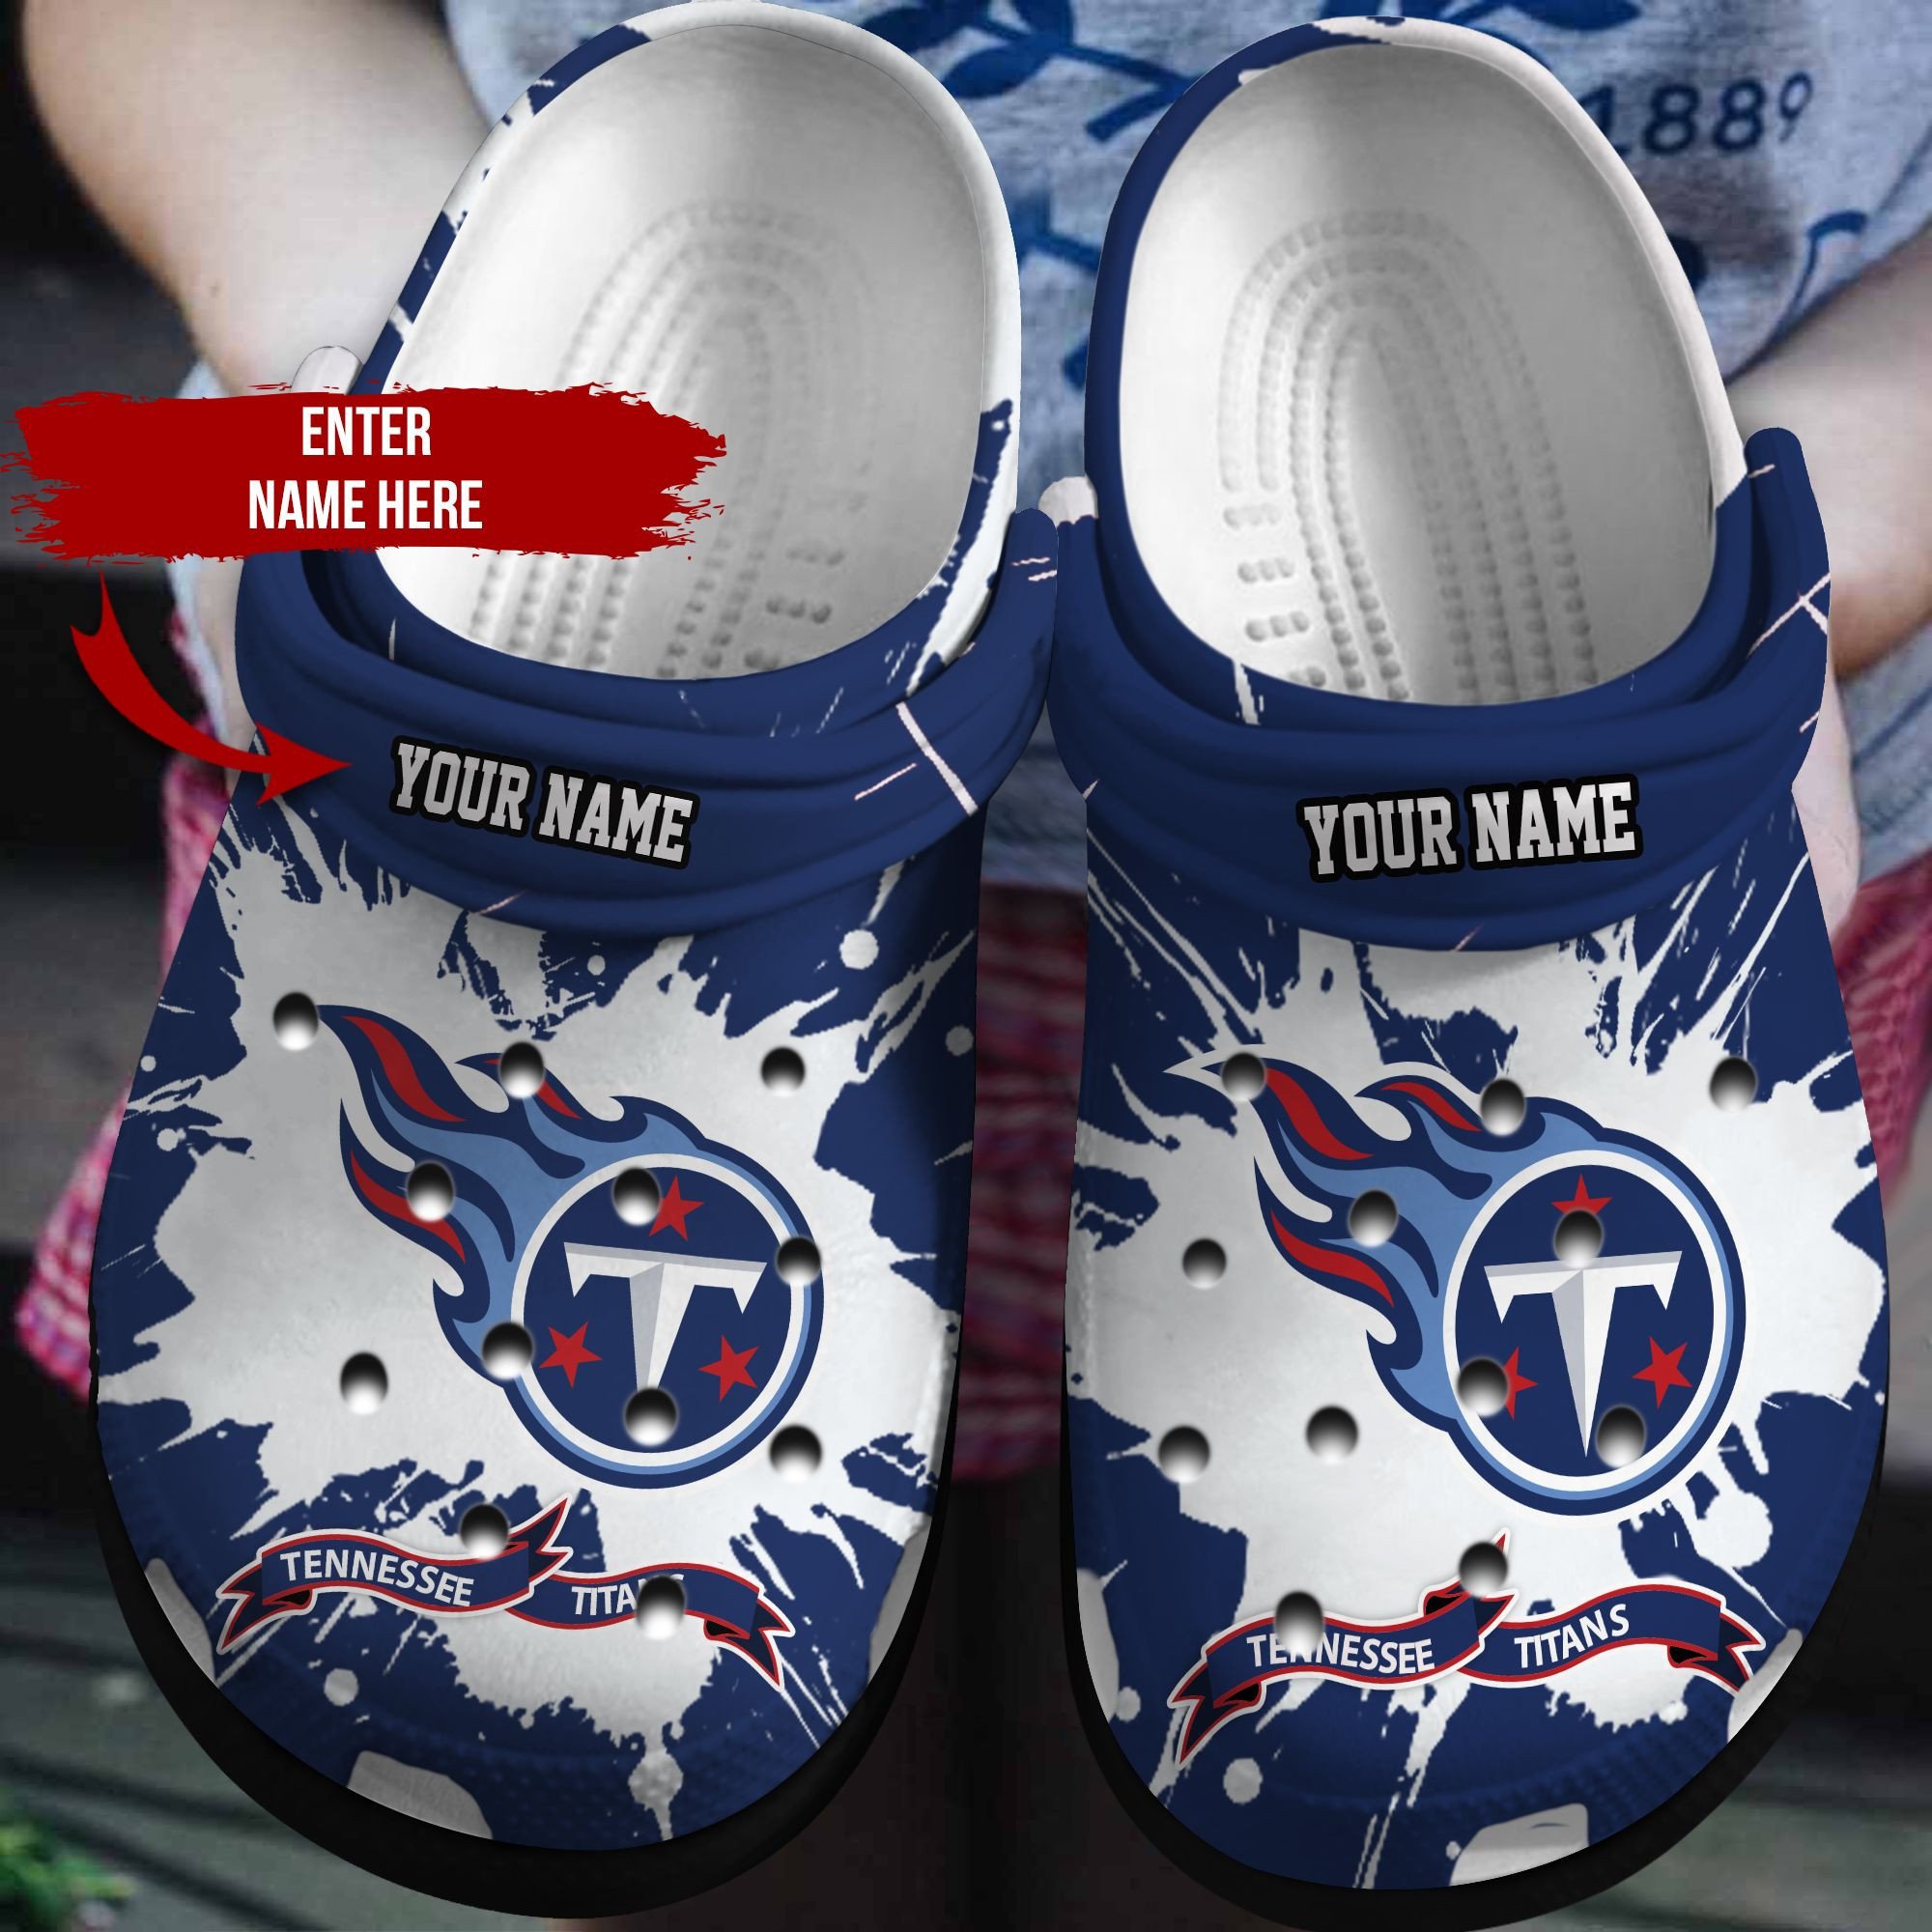 Tennessee Titans Custom Name Crocs Crocband Clog Comfortable Water Shoes